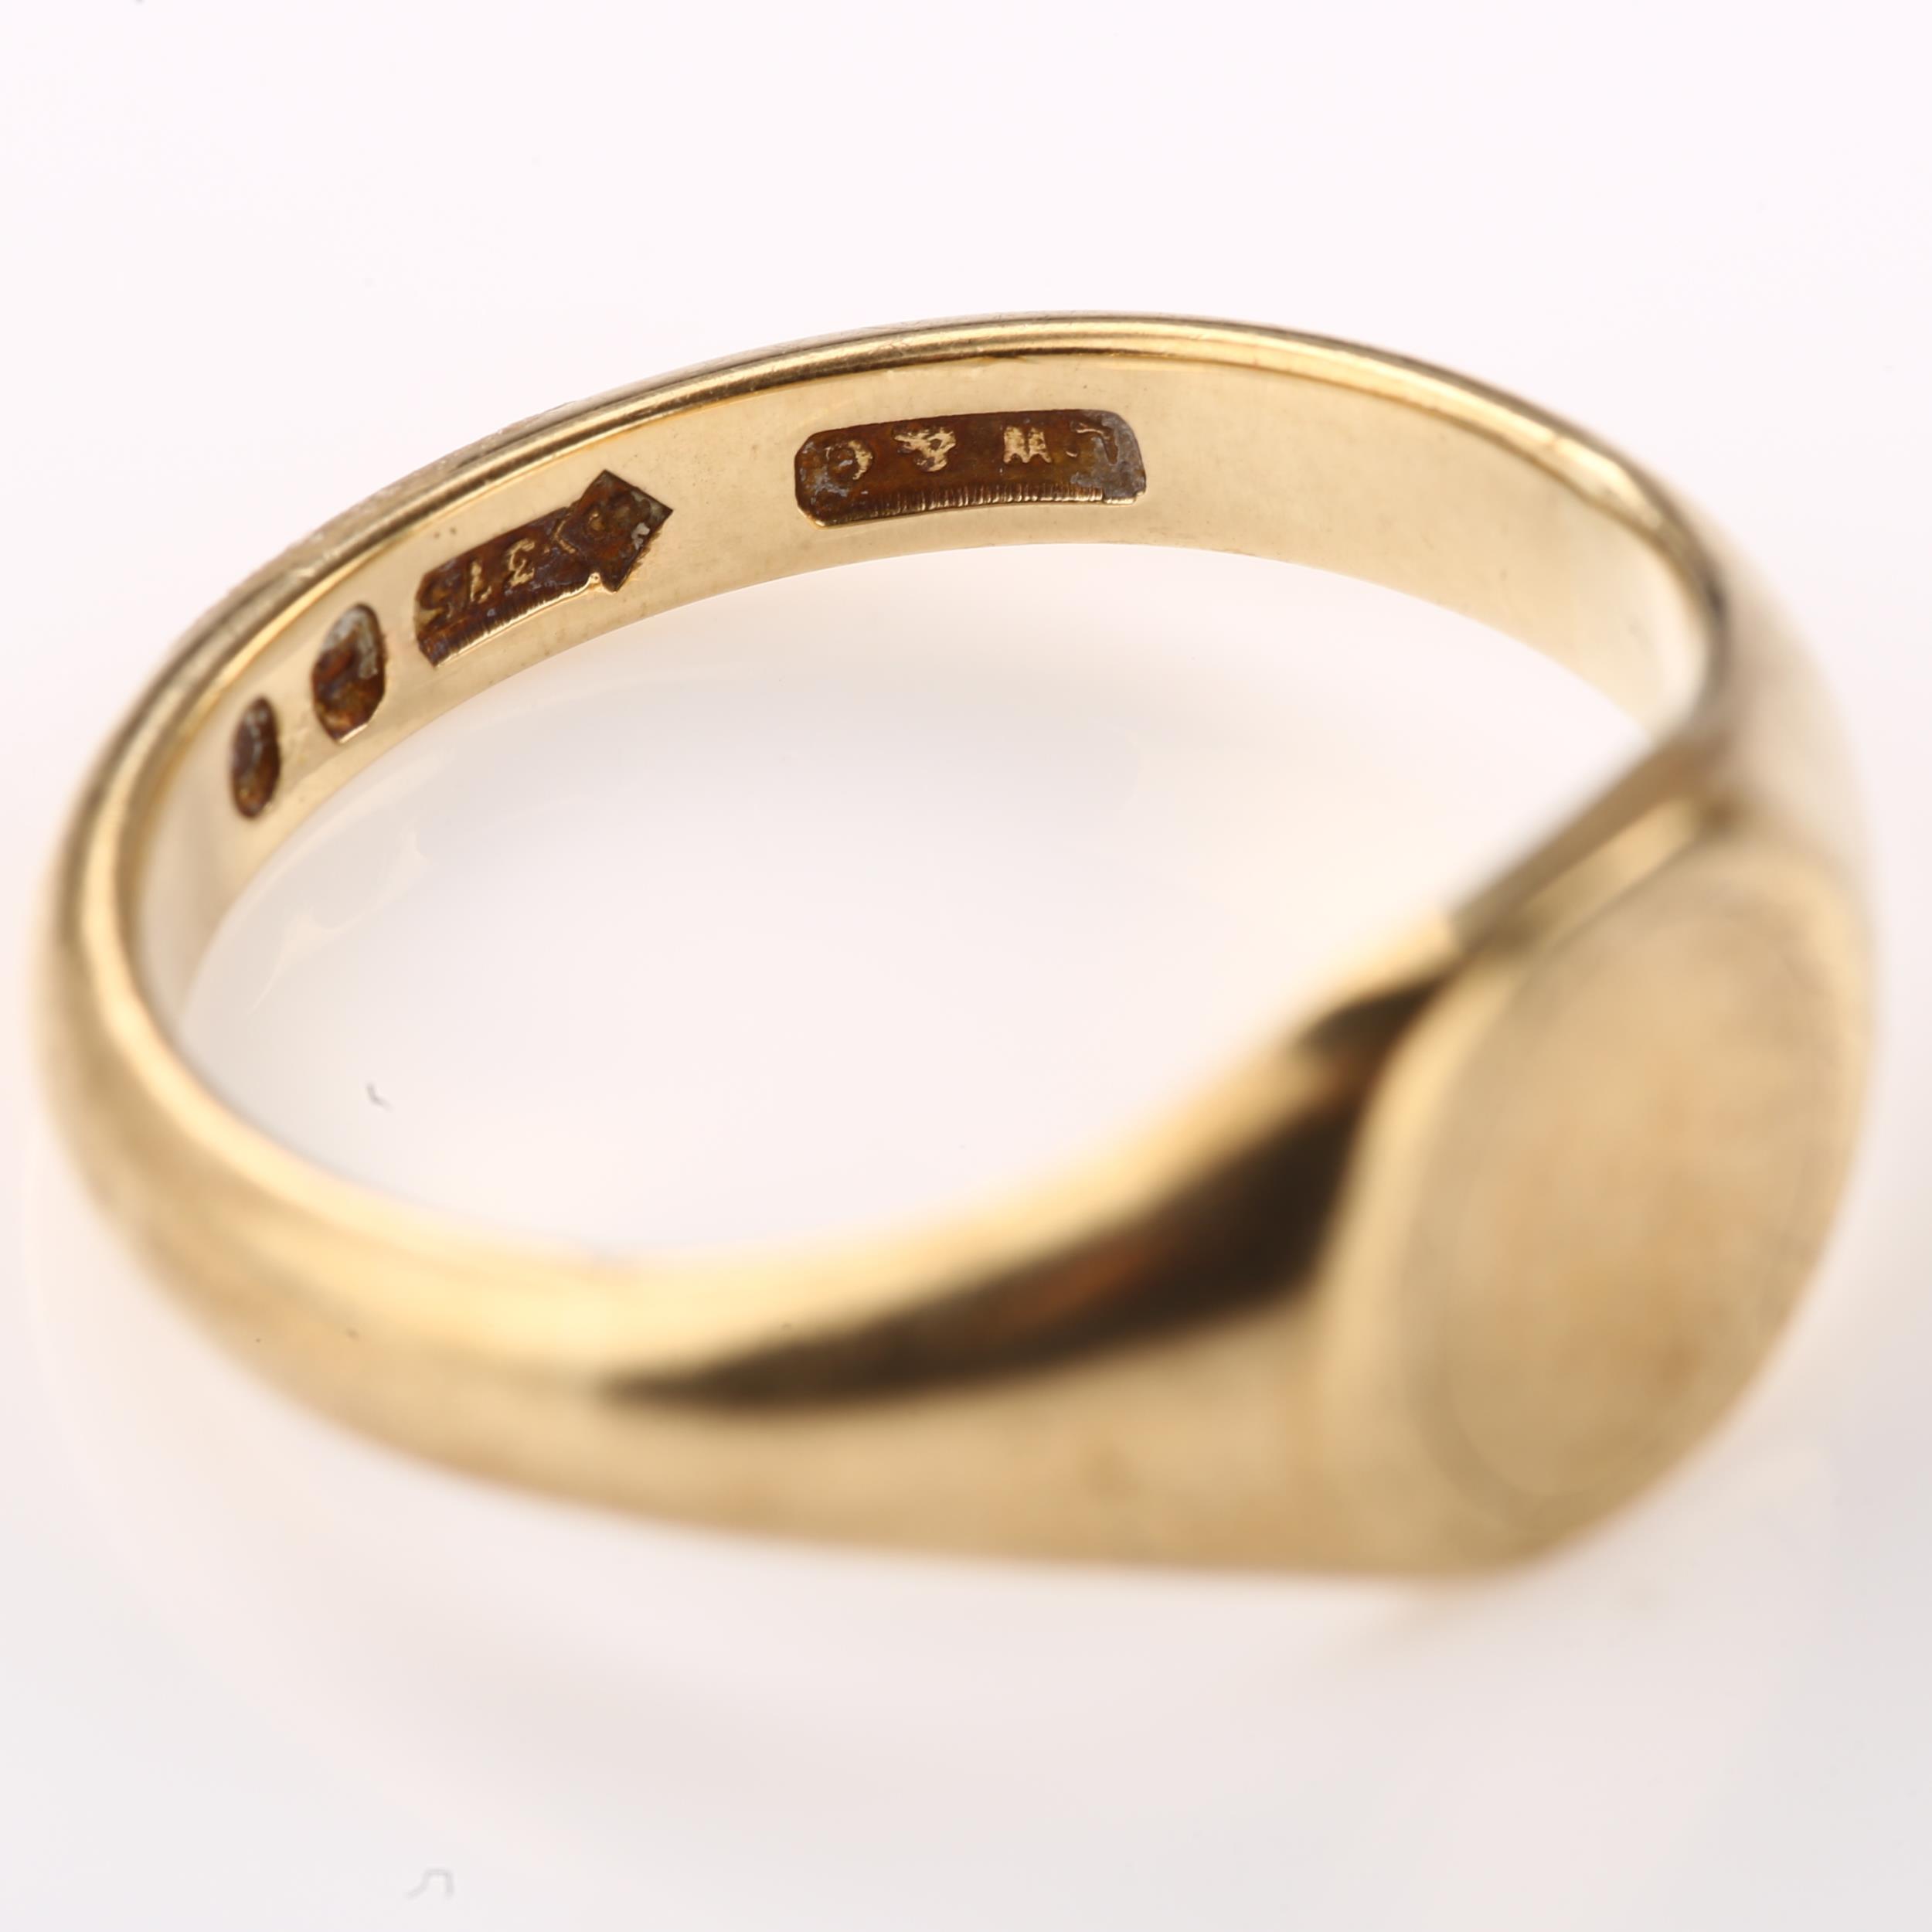 An early 20th century 9ct gold signet ring, maker's marks L W and G, hallmarks London 1928, - Image 2 of 4